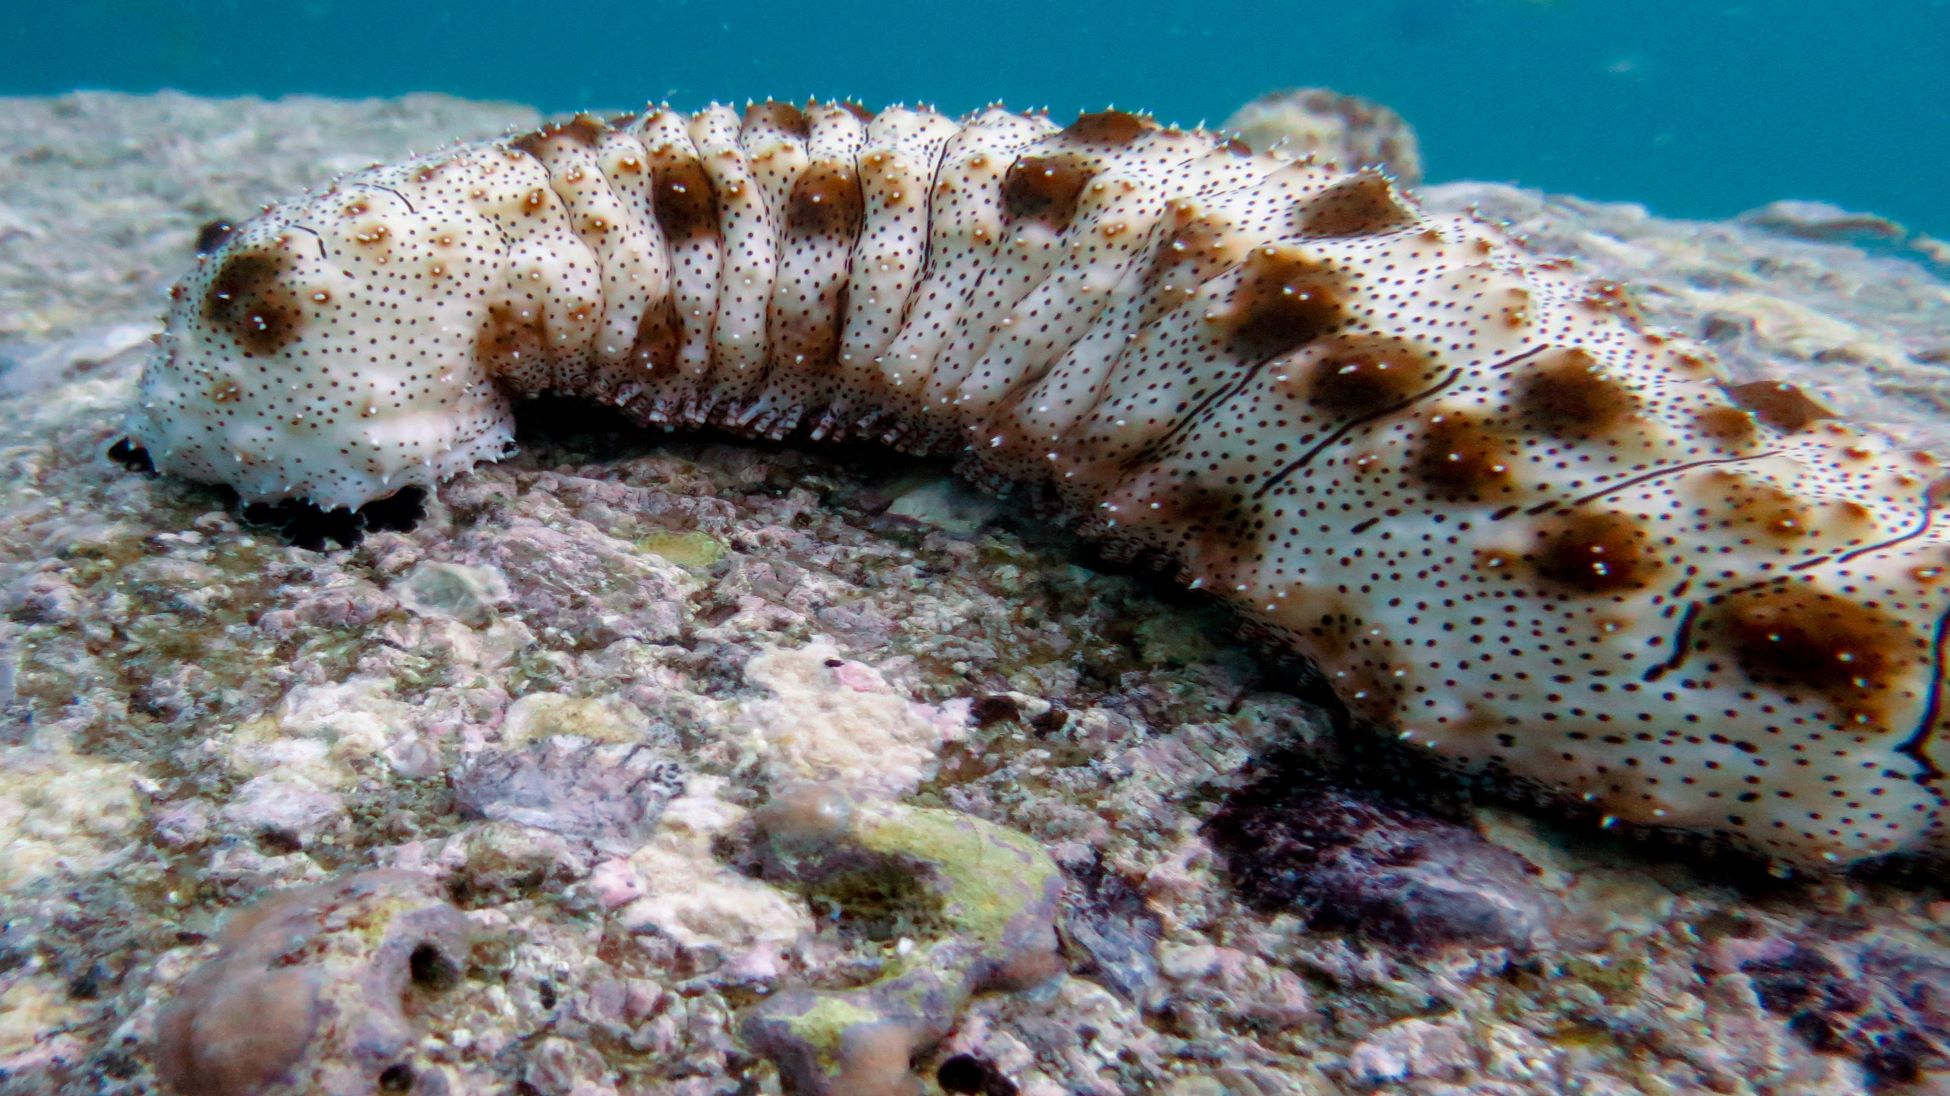 According to new research, sea cucumber offers countless health benefits. Here’s everything you need to know.